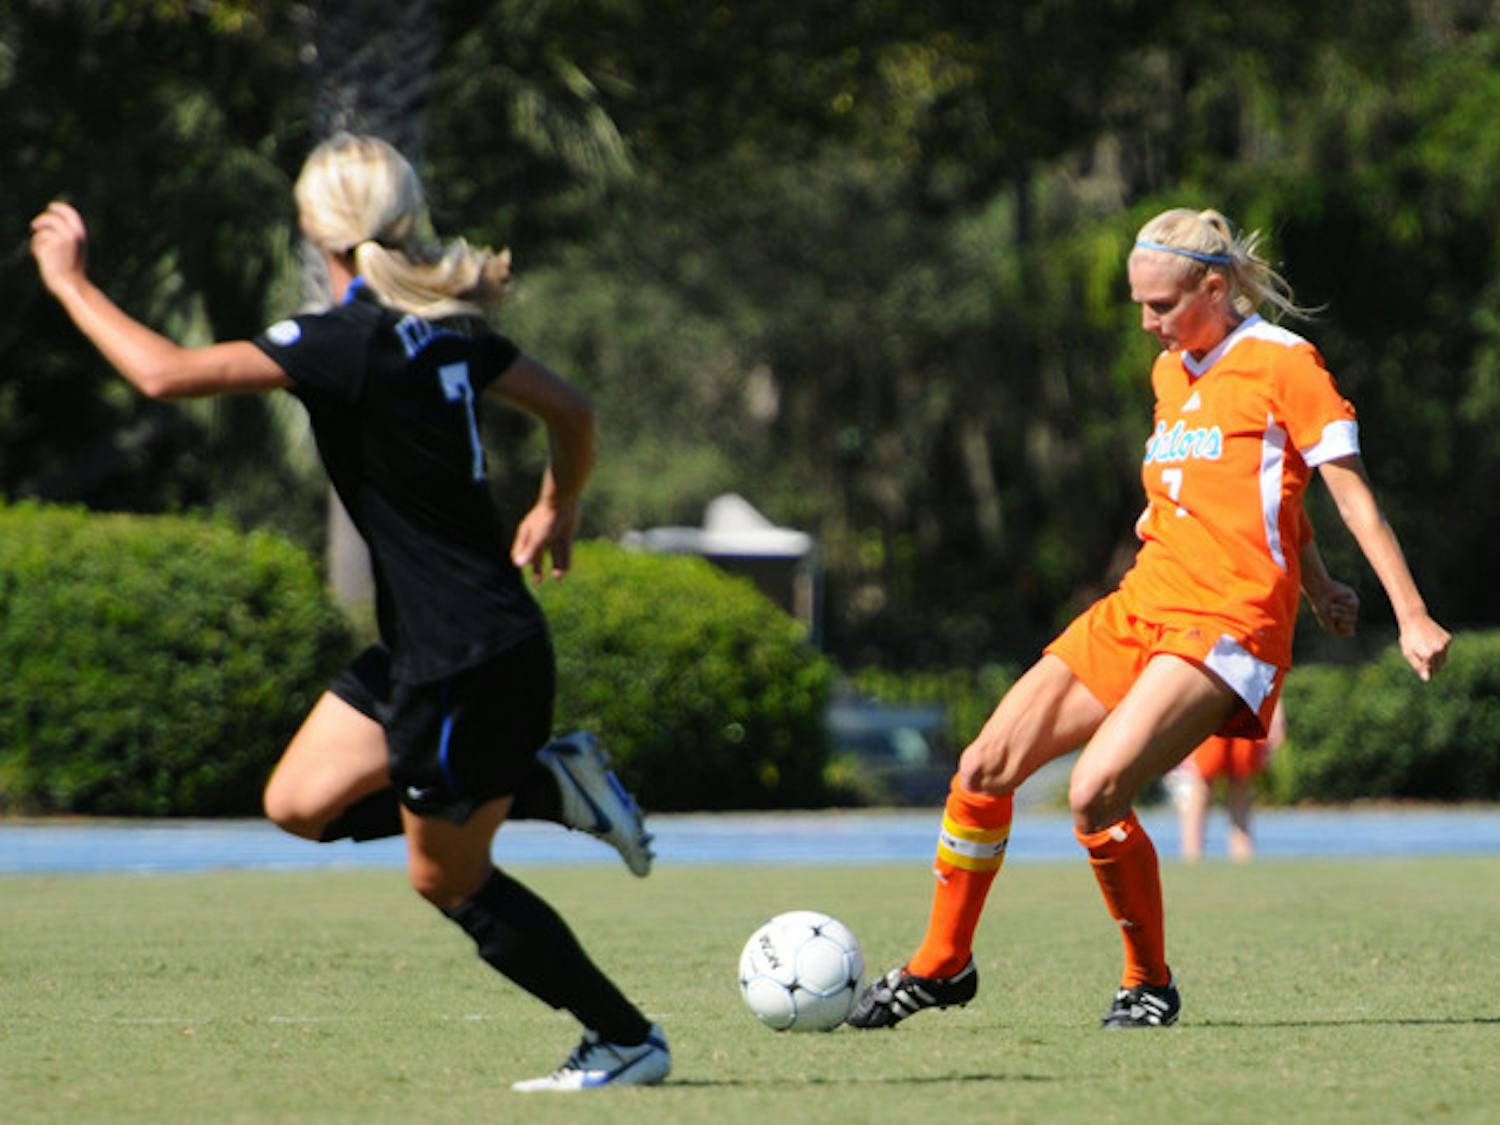 In the third minute Friday, Florida center back Kat Williamson misplayed a ball in the box that led to an another early goal in a 2-1 loss to South Carolina at home.